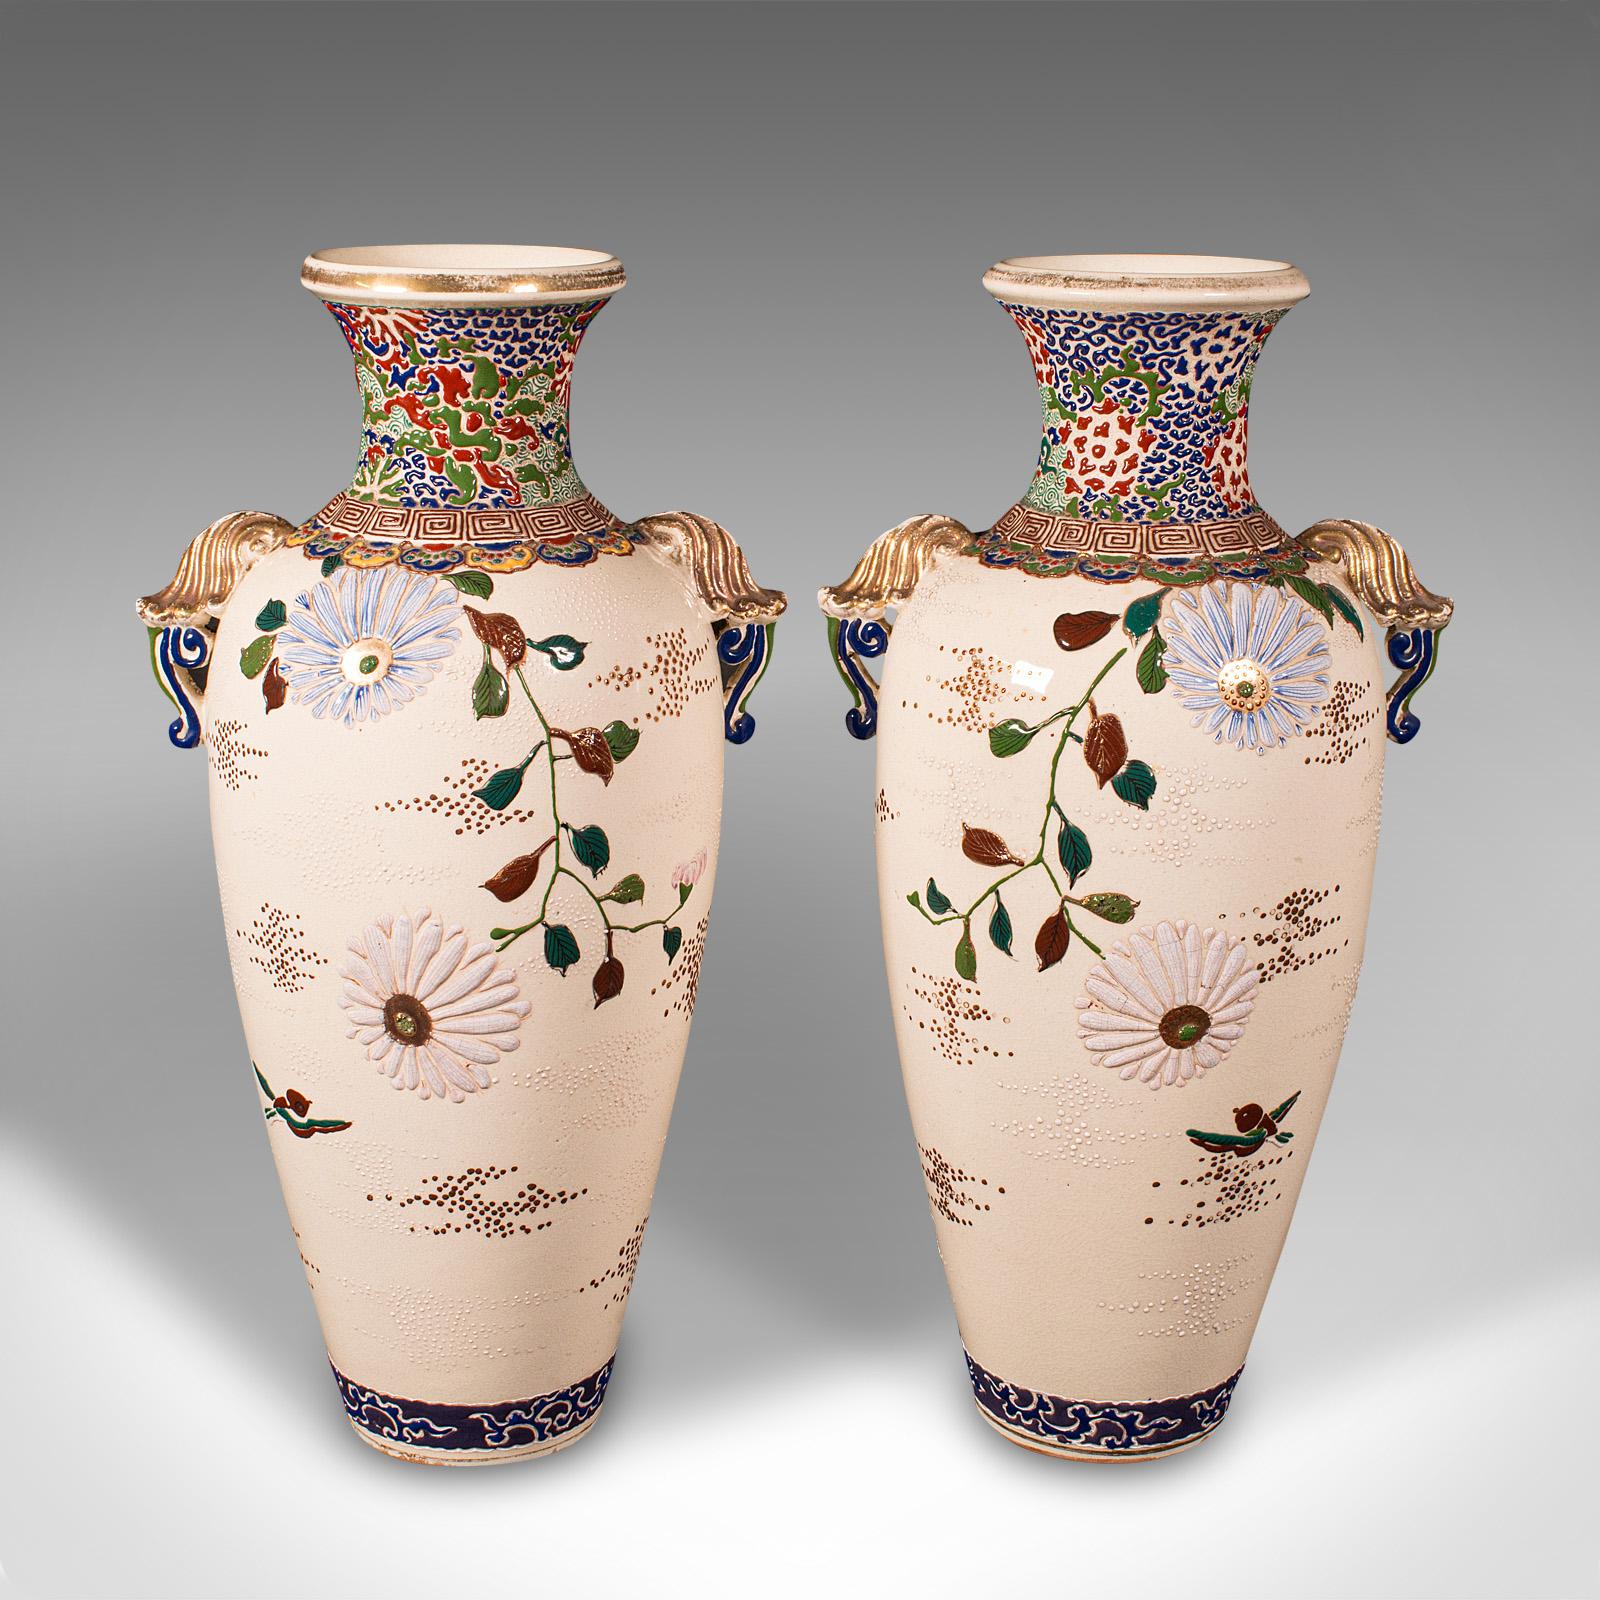 This is a tall pair of vintage Satsuma vases. A Japanese, ceramic flower urn in Oriental Art Deco taste, dating to the mid 20th century, circa 1940.

Classically decorative examples of Japanese ceramics
Displaying a desirable aged patina - both in